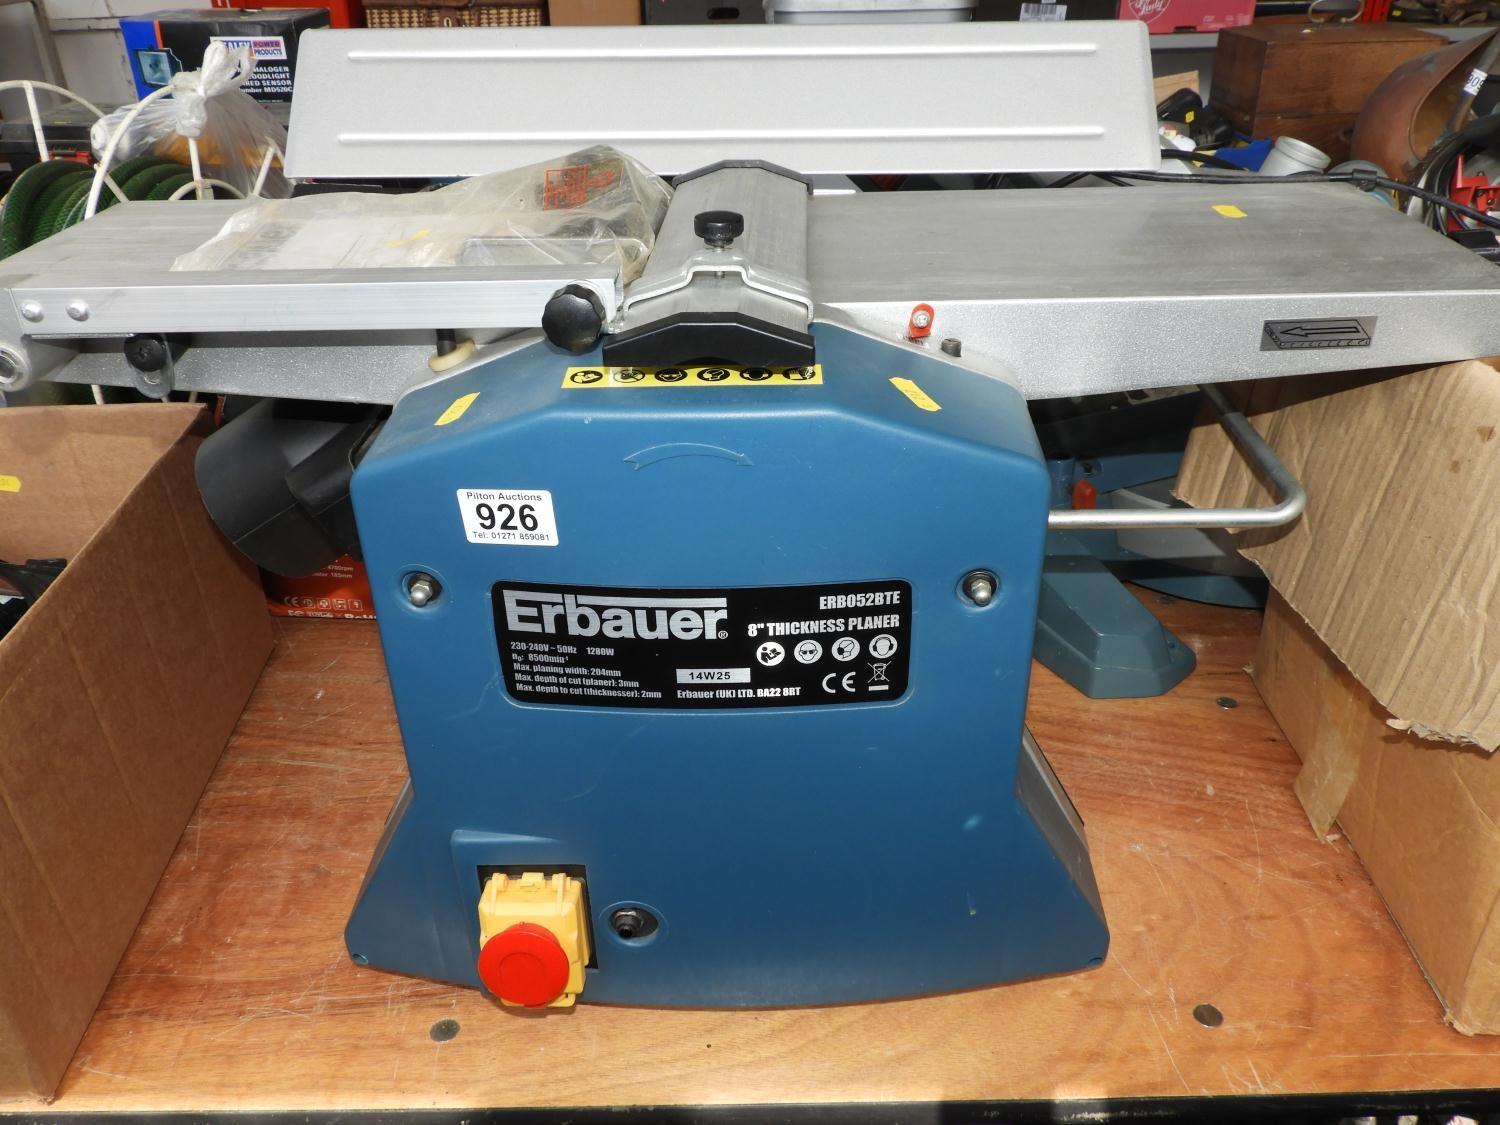 Erbauer 8" Thickness Planer